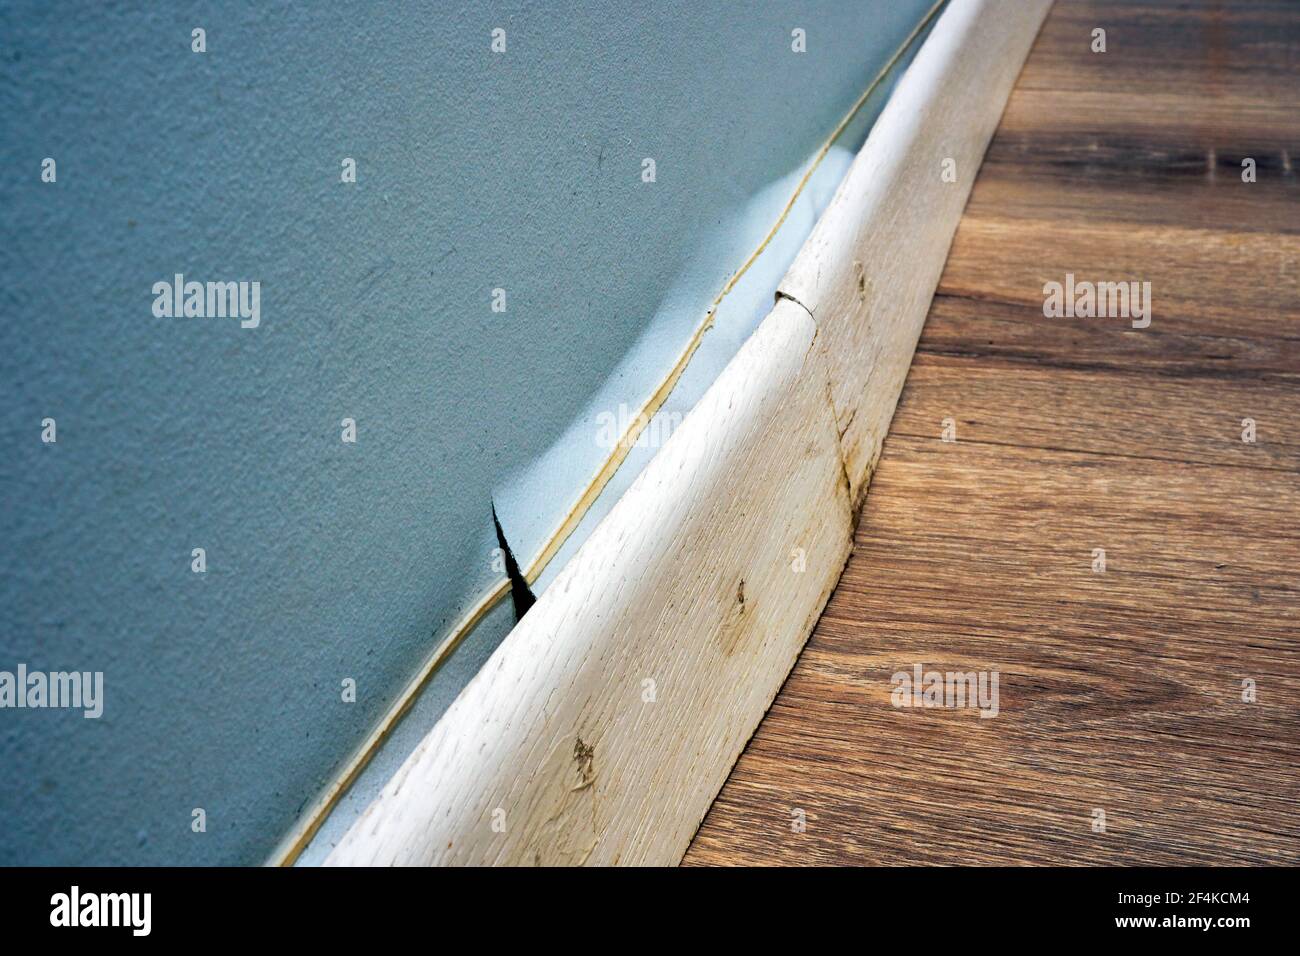 Termite Damage on Wooden Skirting Stock Image - Image of brown, plaster:  188994863